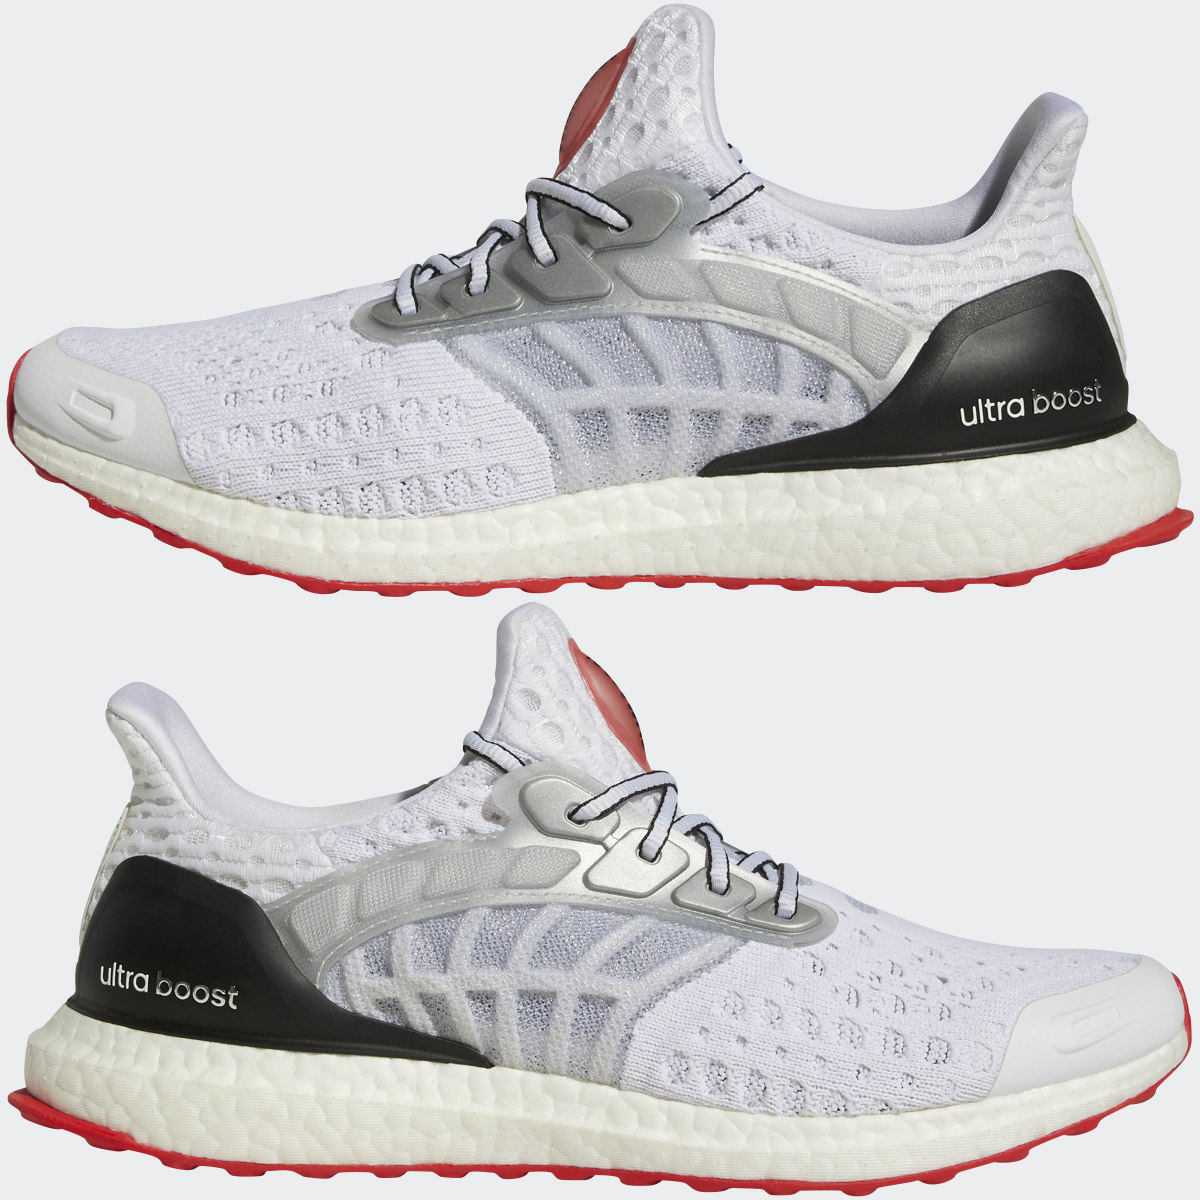 ultraboost climacool 2 dna shoes